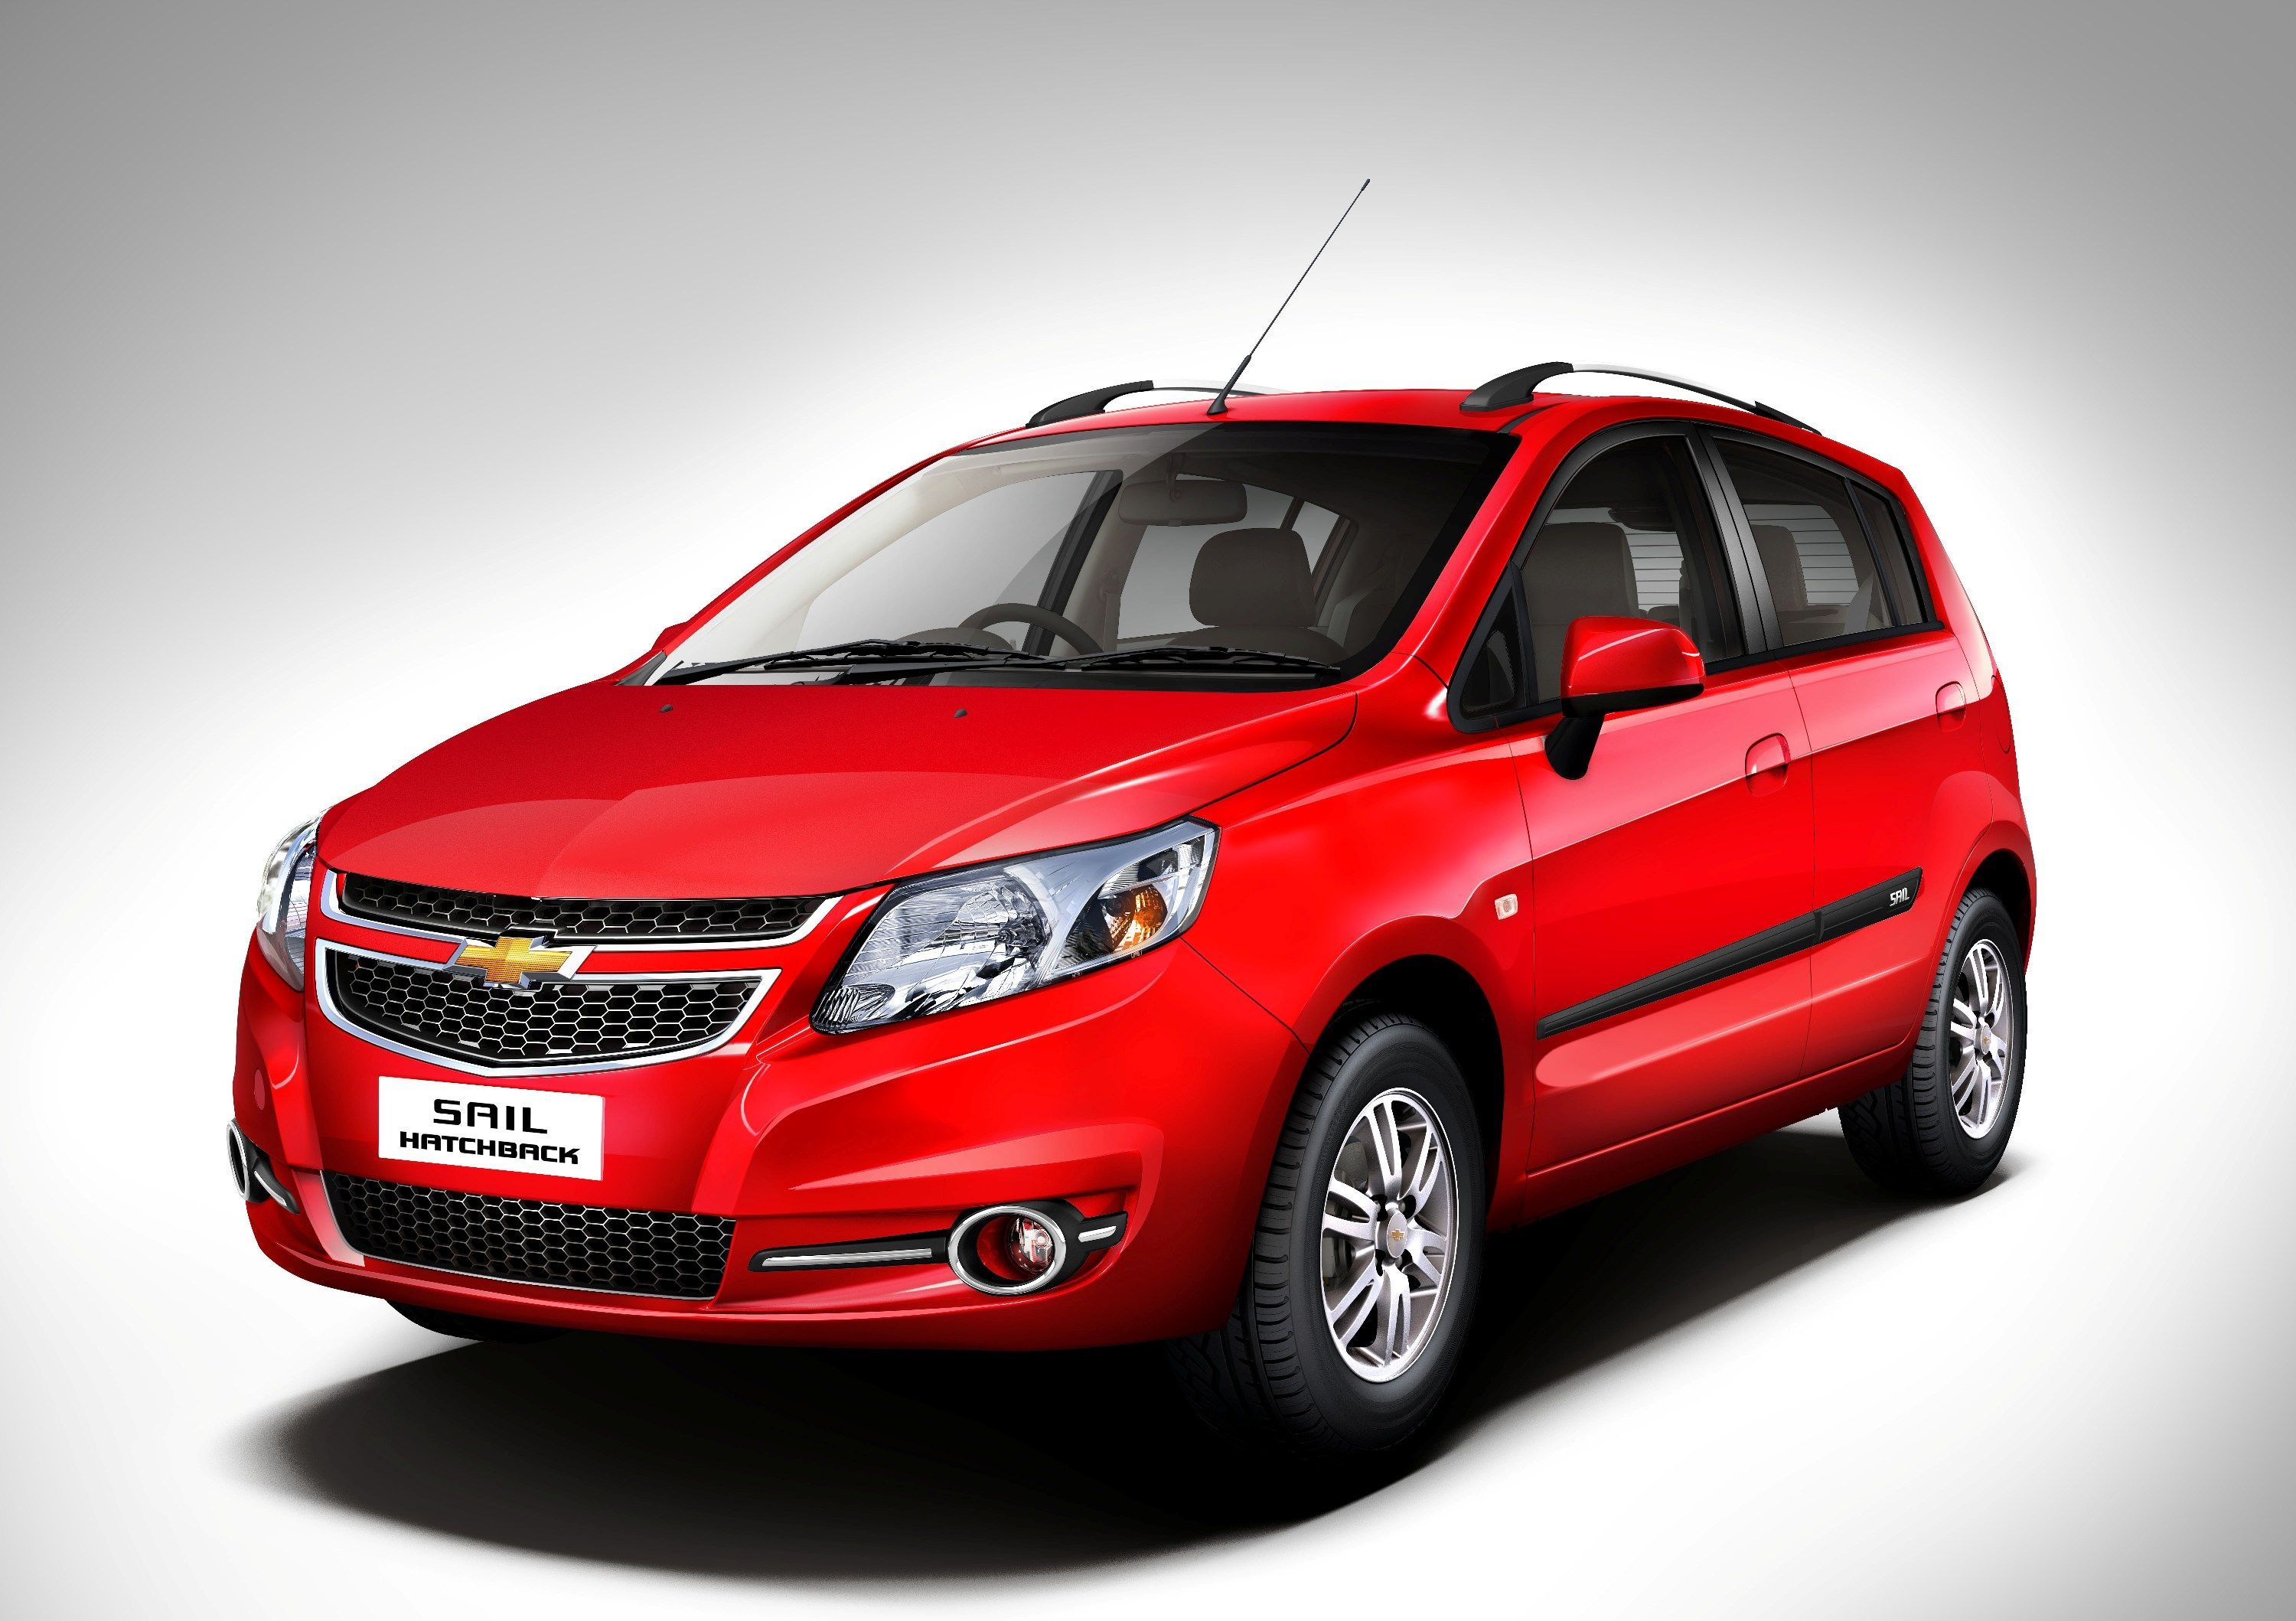 GM India launches the new Chevrolet SAIL  available in sedan and hatchback